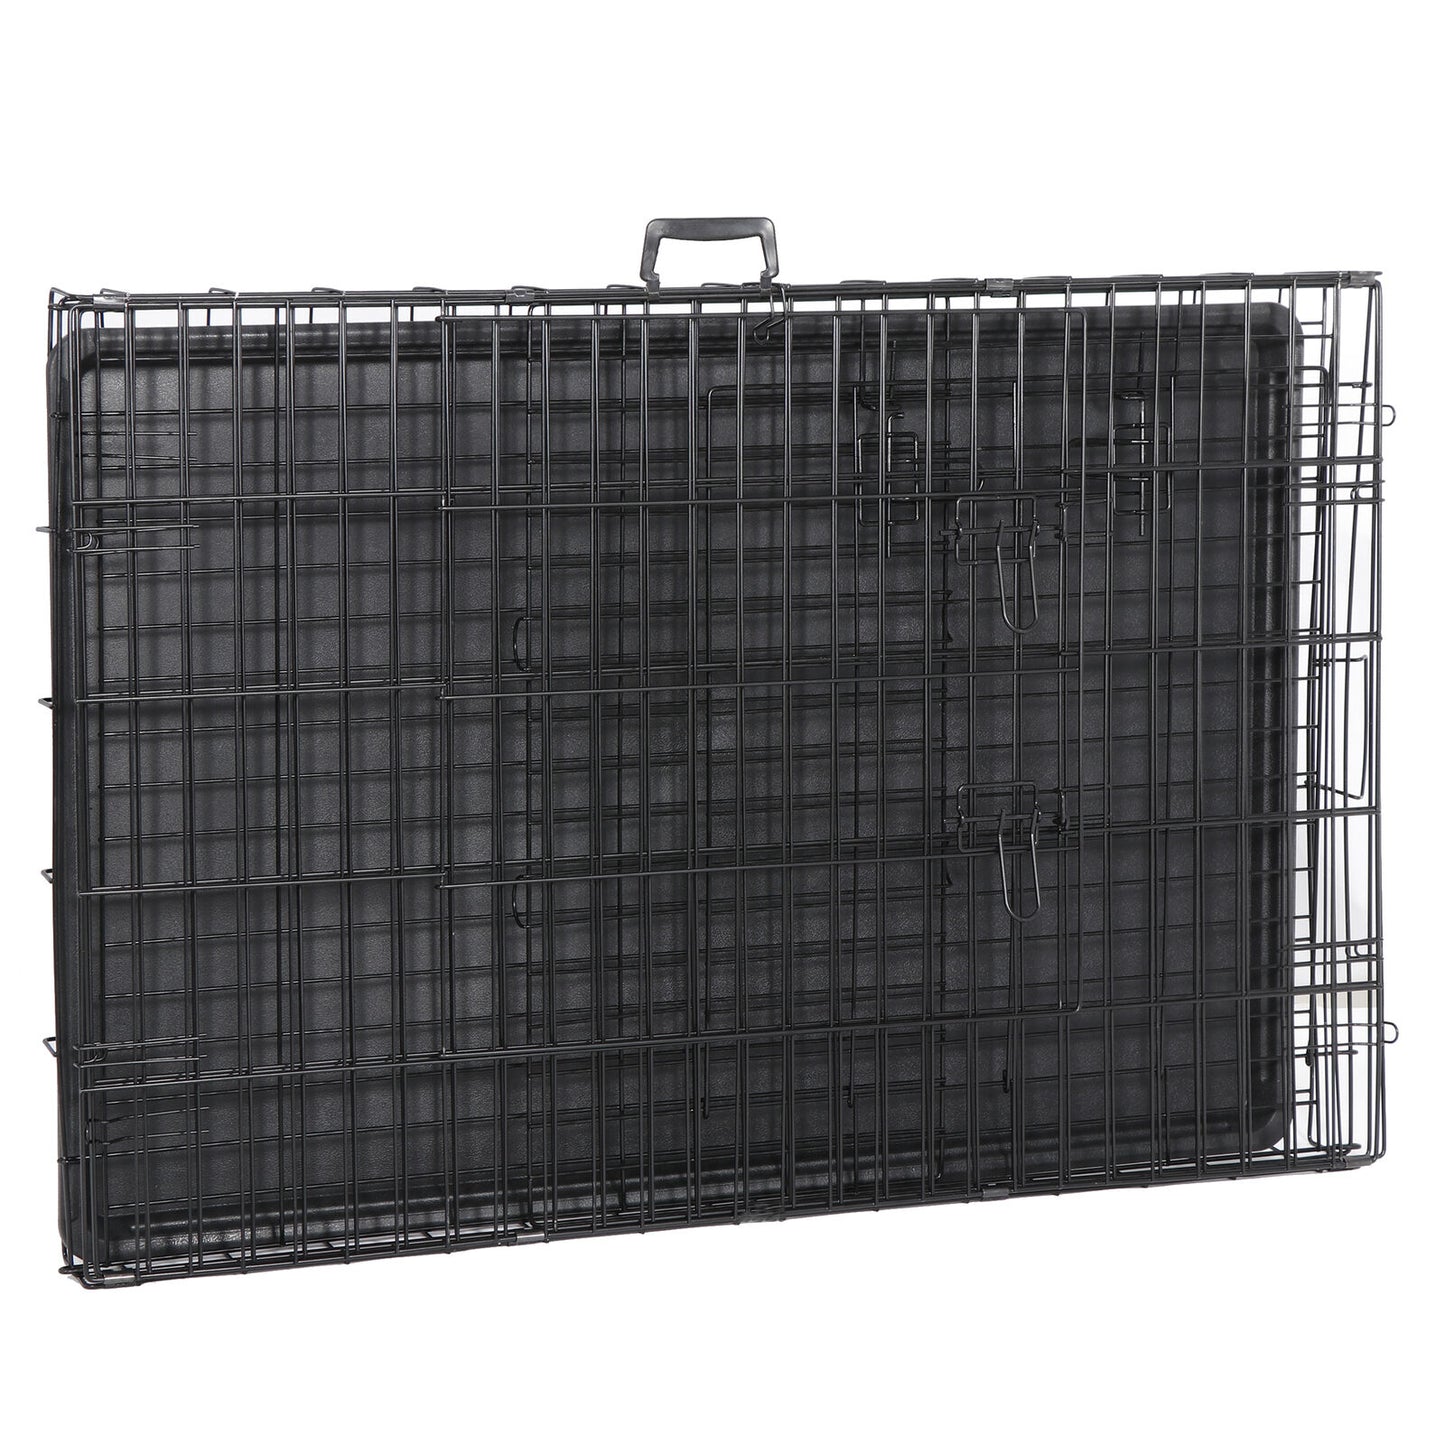 42" Metal Pets Dog Crate Double Door Folding Metal Dog Crates Fully Equipped